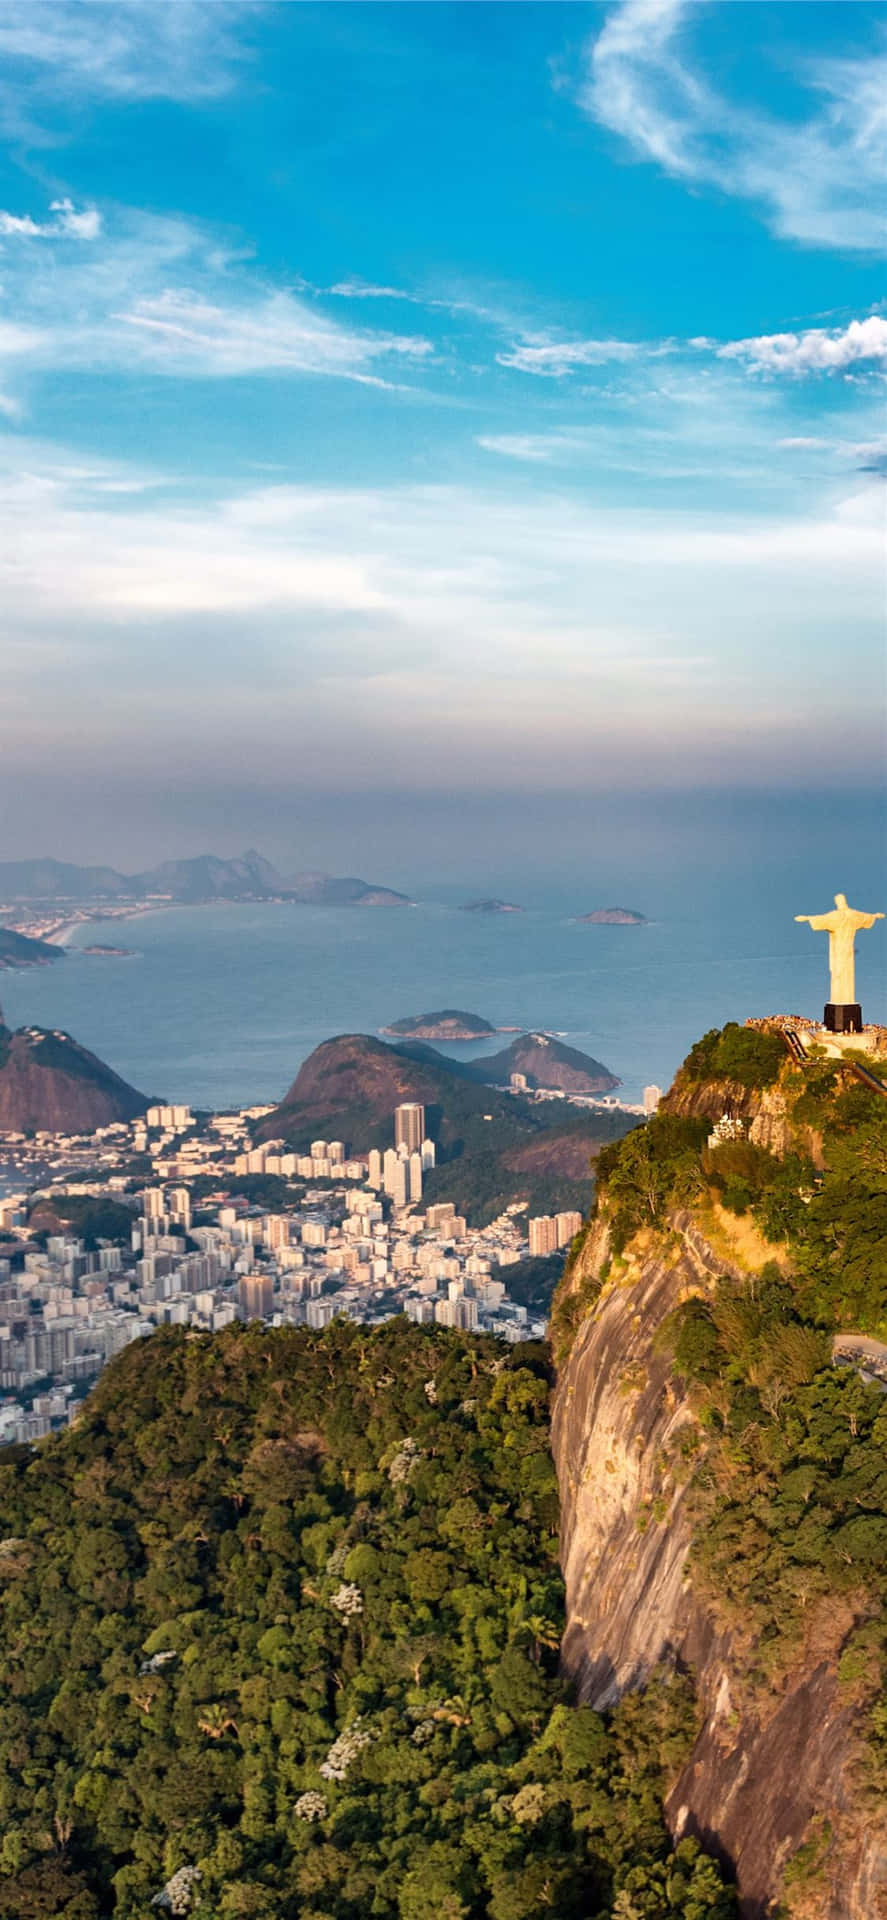 Discover the rich culture and diverse landscape of Brazil